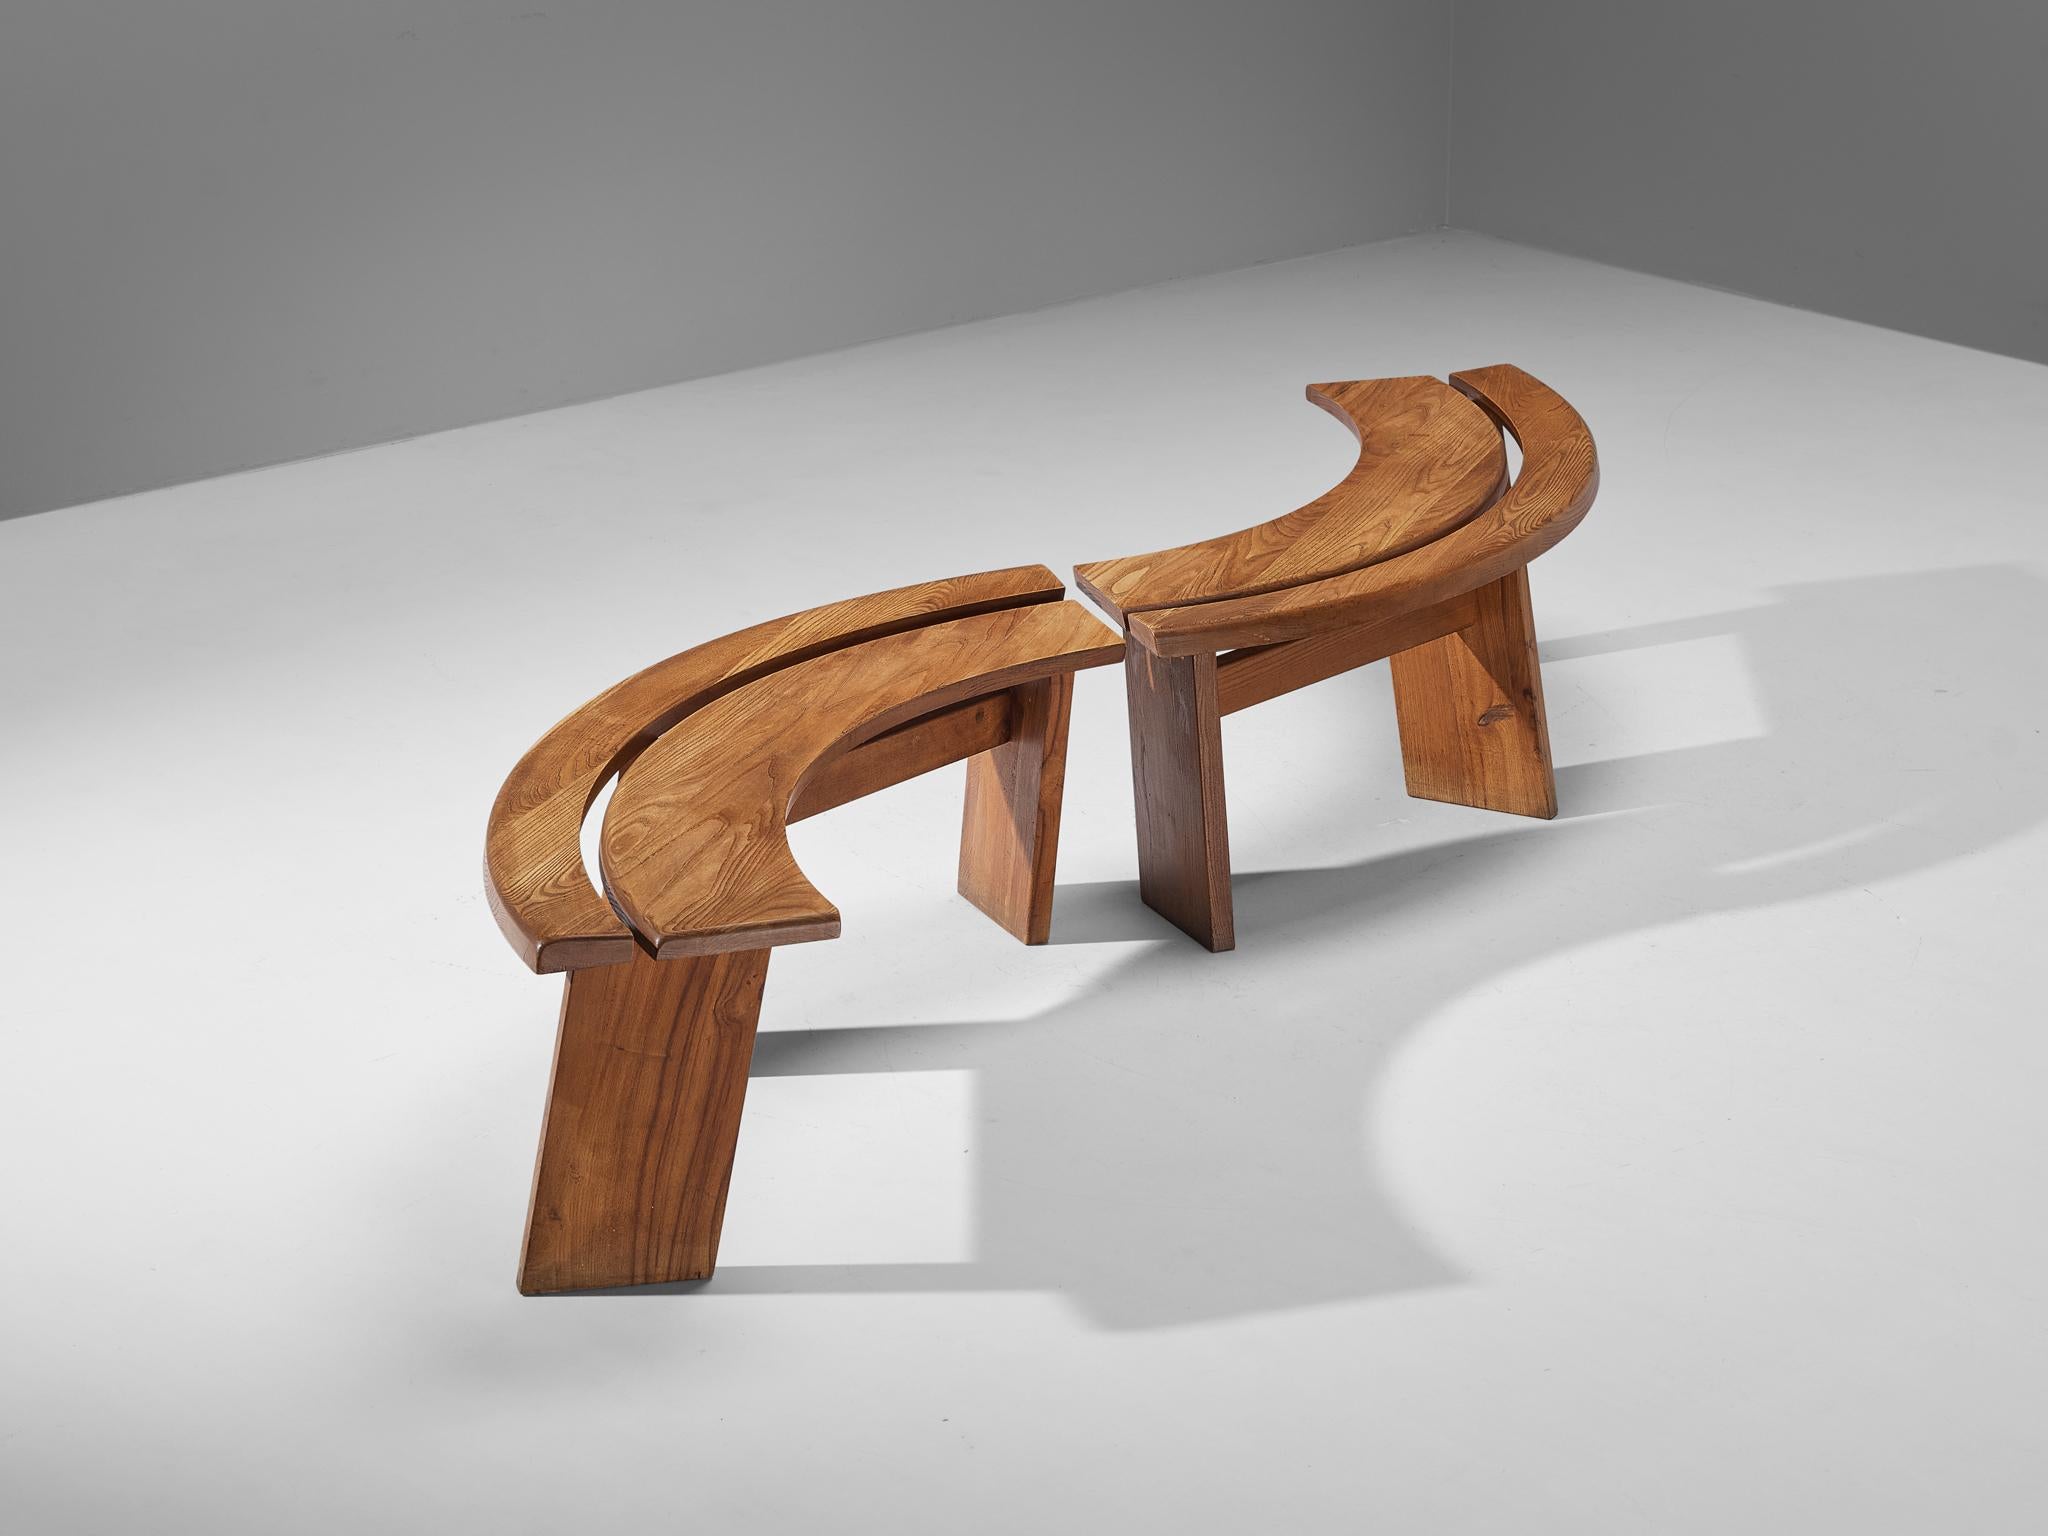 Pierre Chapo, benches model 'S38A', elm, France, 1960s.

These wonderful ‘S38A’ benches are designed by Pierre Chapo in the 1960s. A soft, warm all-over patina is visible on the wood of this bench. This emphasizes the natural expression of the